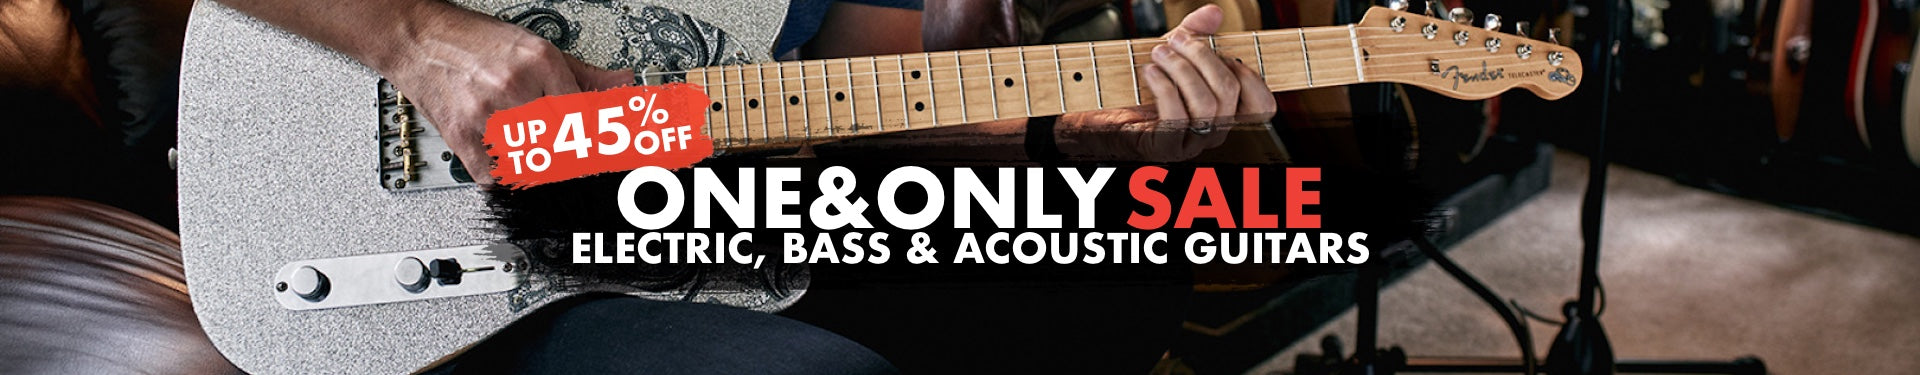 One & Only Guitar Sale